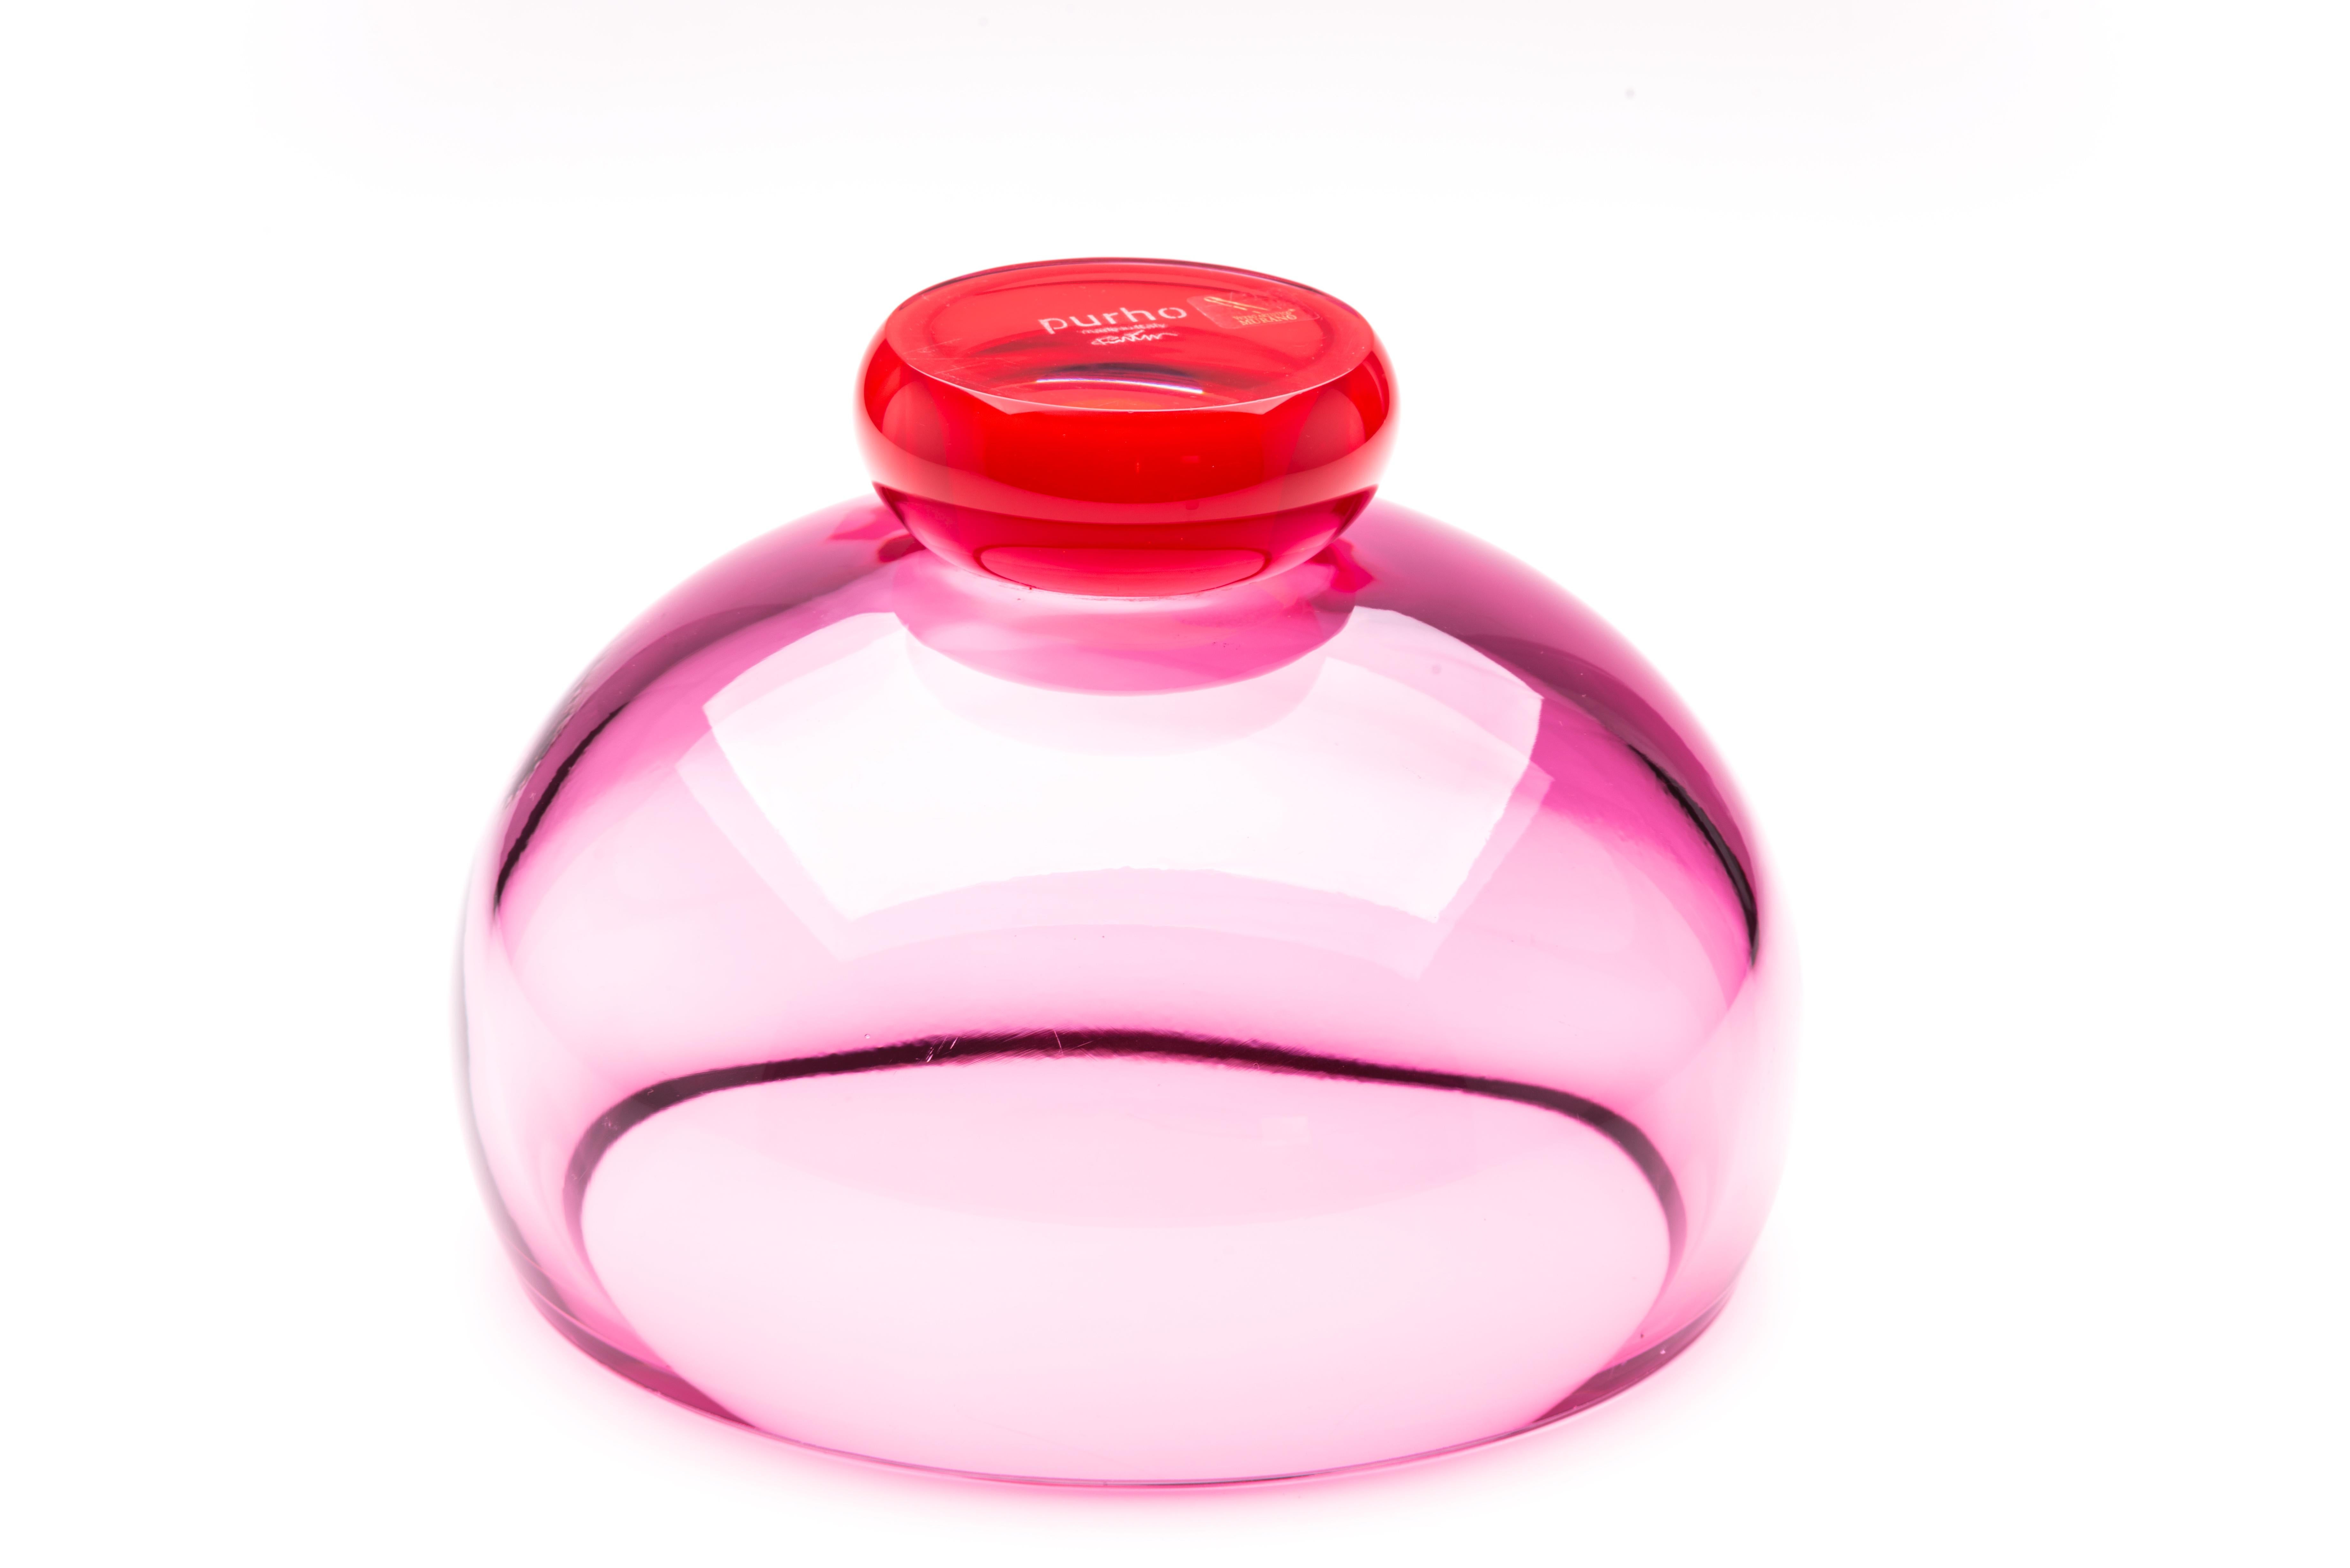 21st century Karim Rashid Coppa bowl transparent Murano glass various colors.
Designed by Karim Rashid, Coppa is a small glass container with round, sinuous, markedly colored shapes: deep pink the central body, ruby red the base. A cheerful and